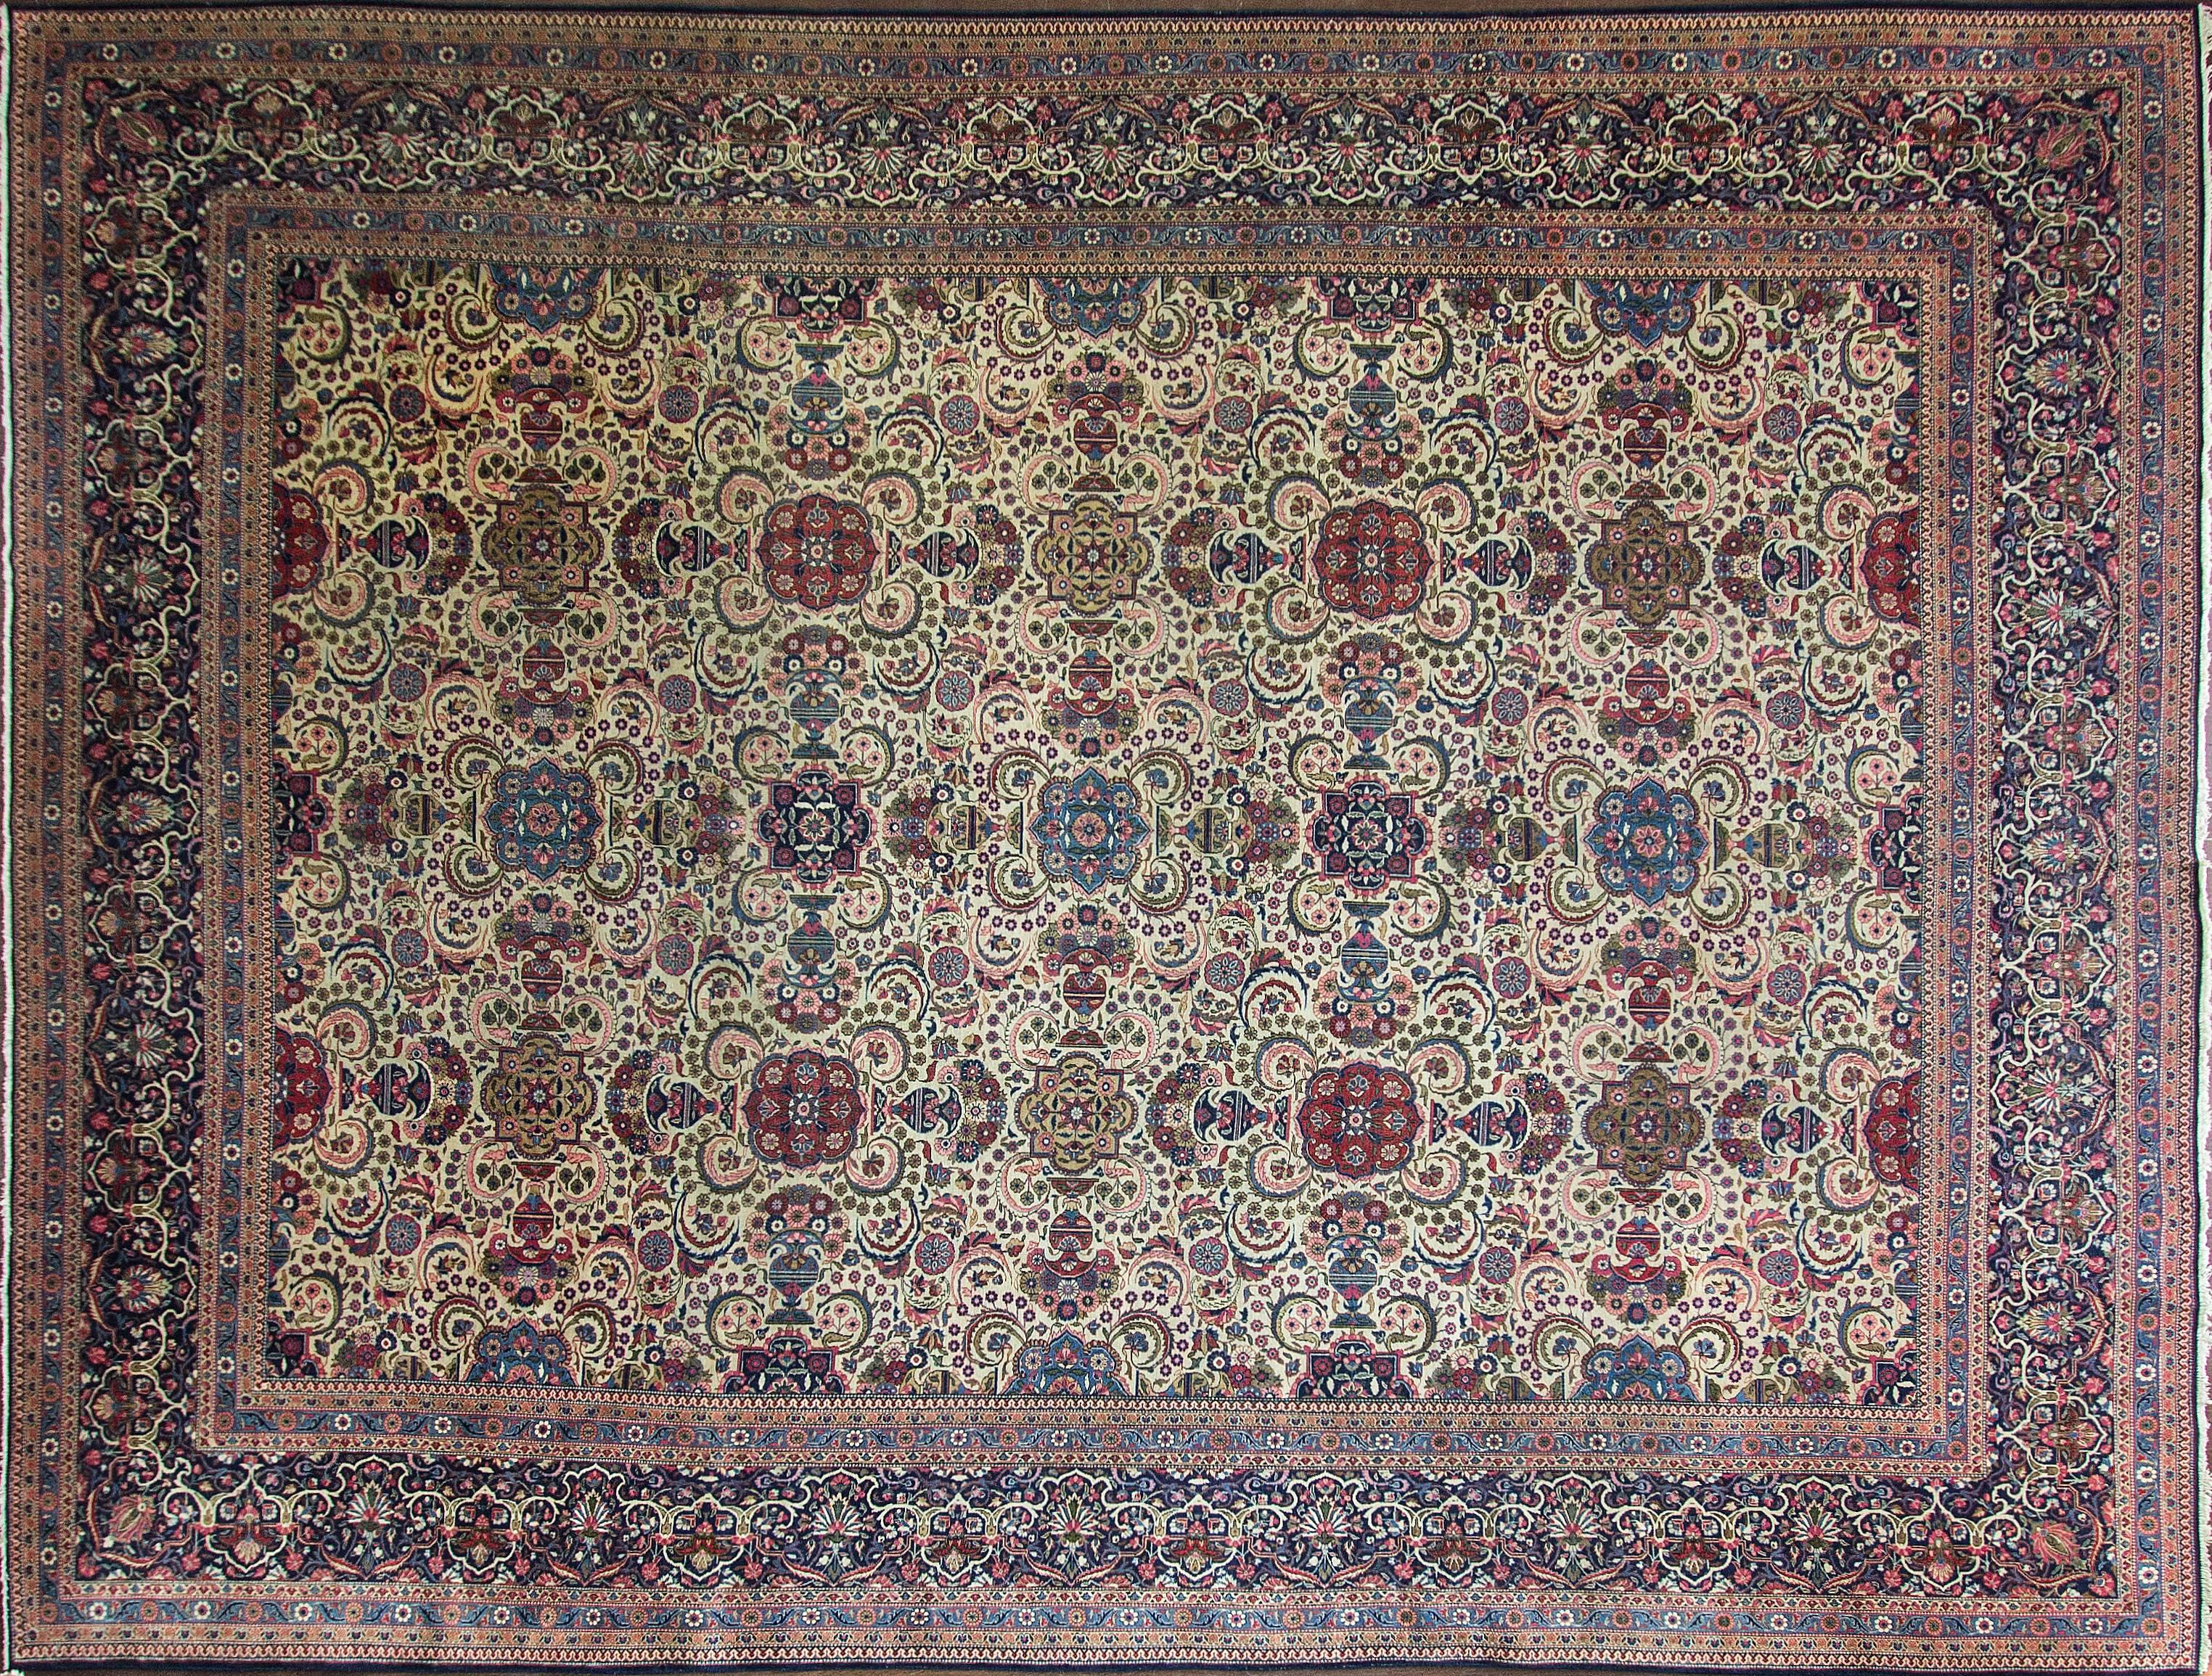 Kashan is a city in North Central Iran. We know that there was production of Persian carpet at Royal workshops in the 17th and early 18th century. Many authors attribute Persian rugs and carpet to Kashan in the 16th century particularly of the